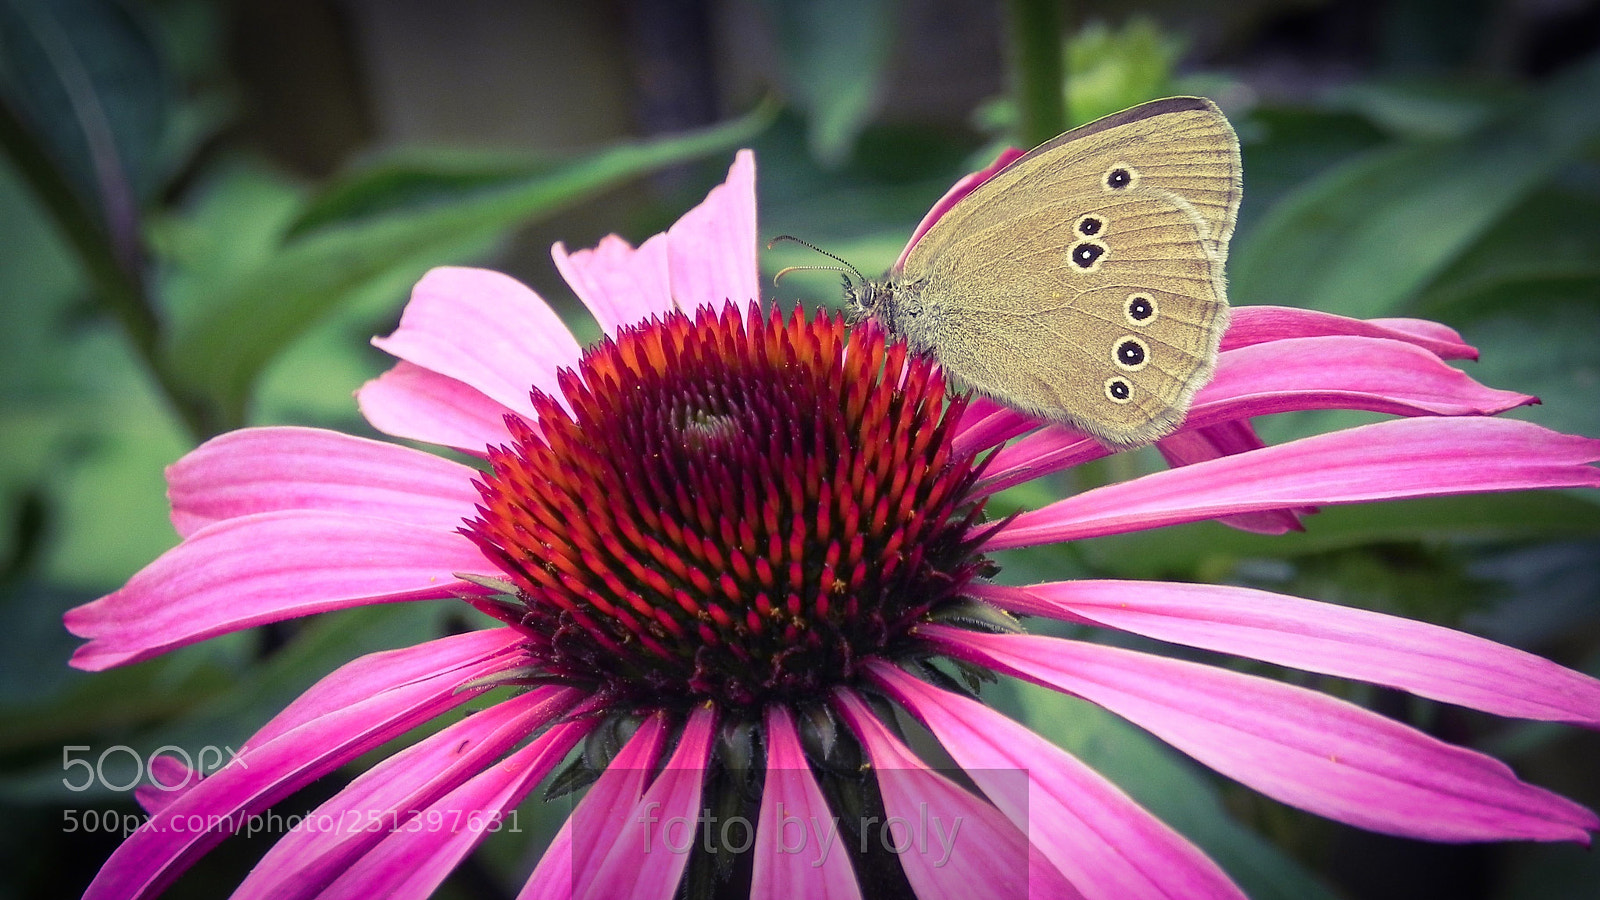 Nikon Coolpix P100 sample photo. Butterfly and flower photography